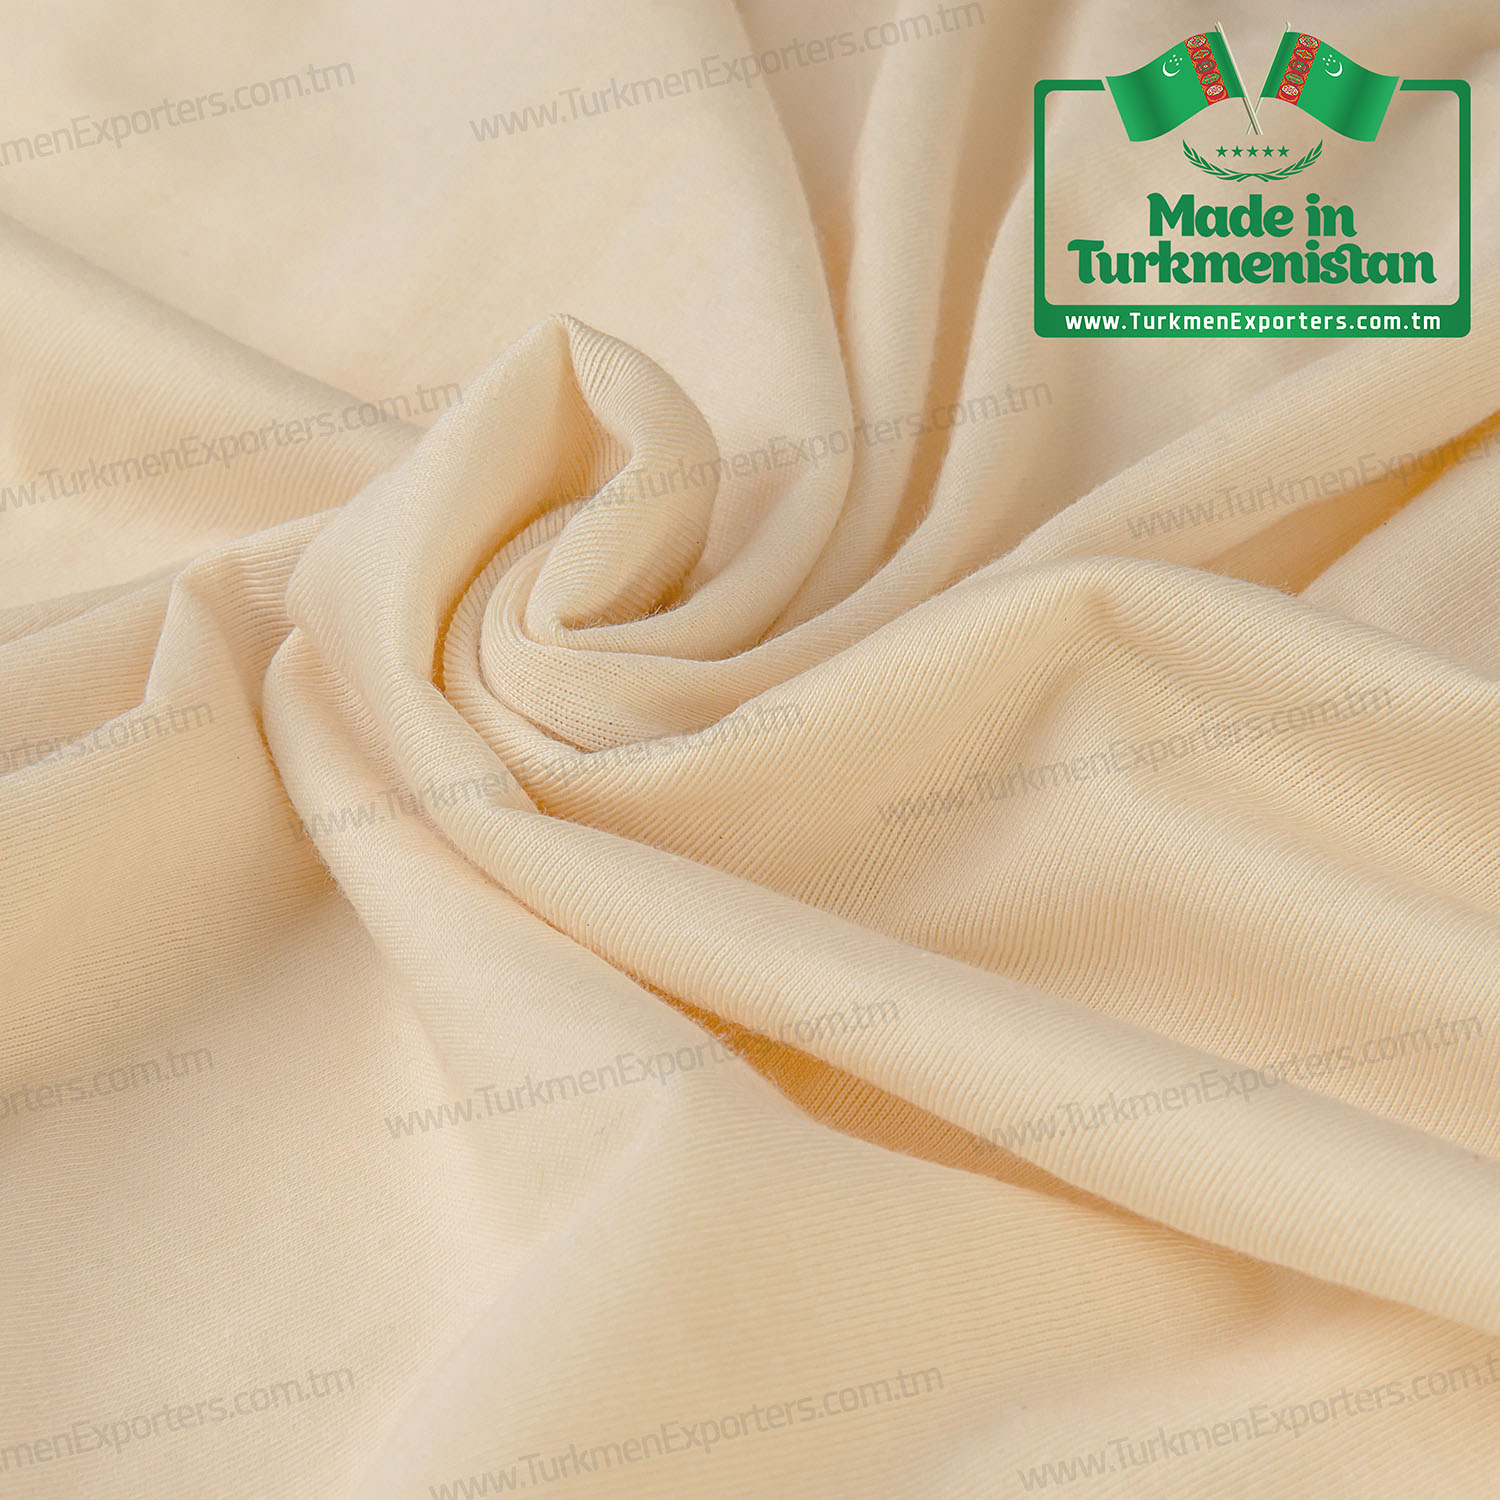 Knitted greige raw fabric Supreme 100% cotton | Gypjak textile complex named after Saparmurat Niyazov